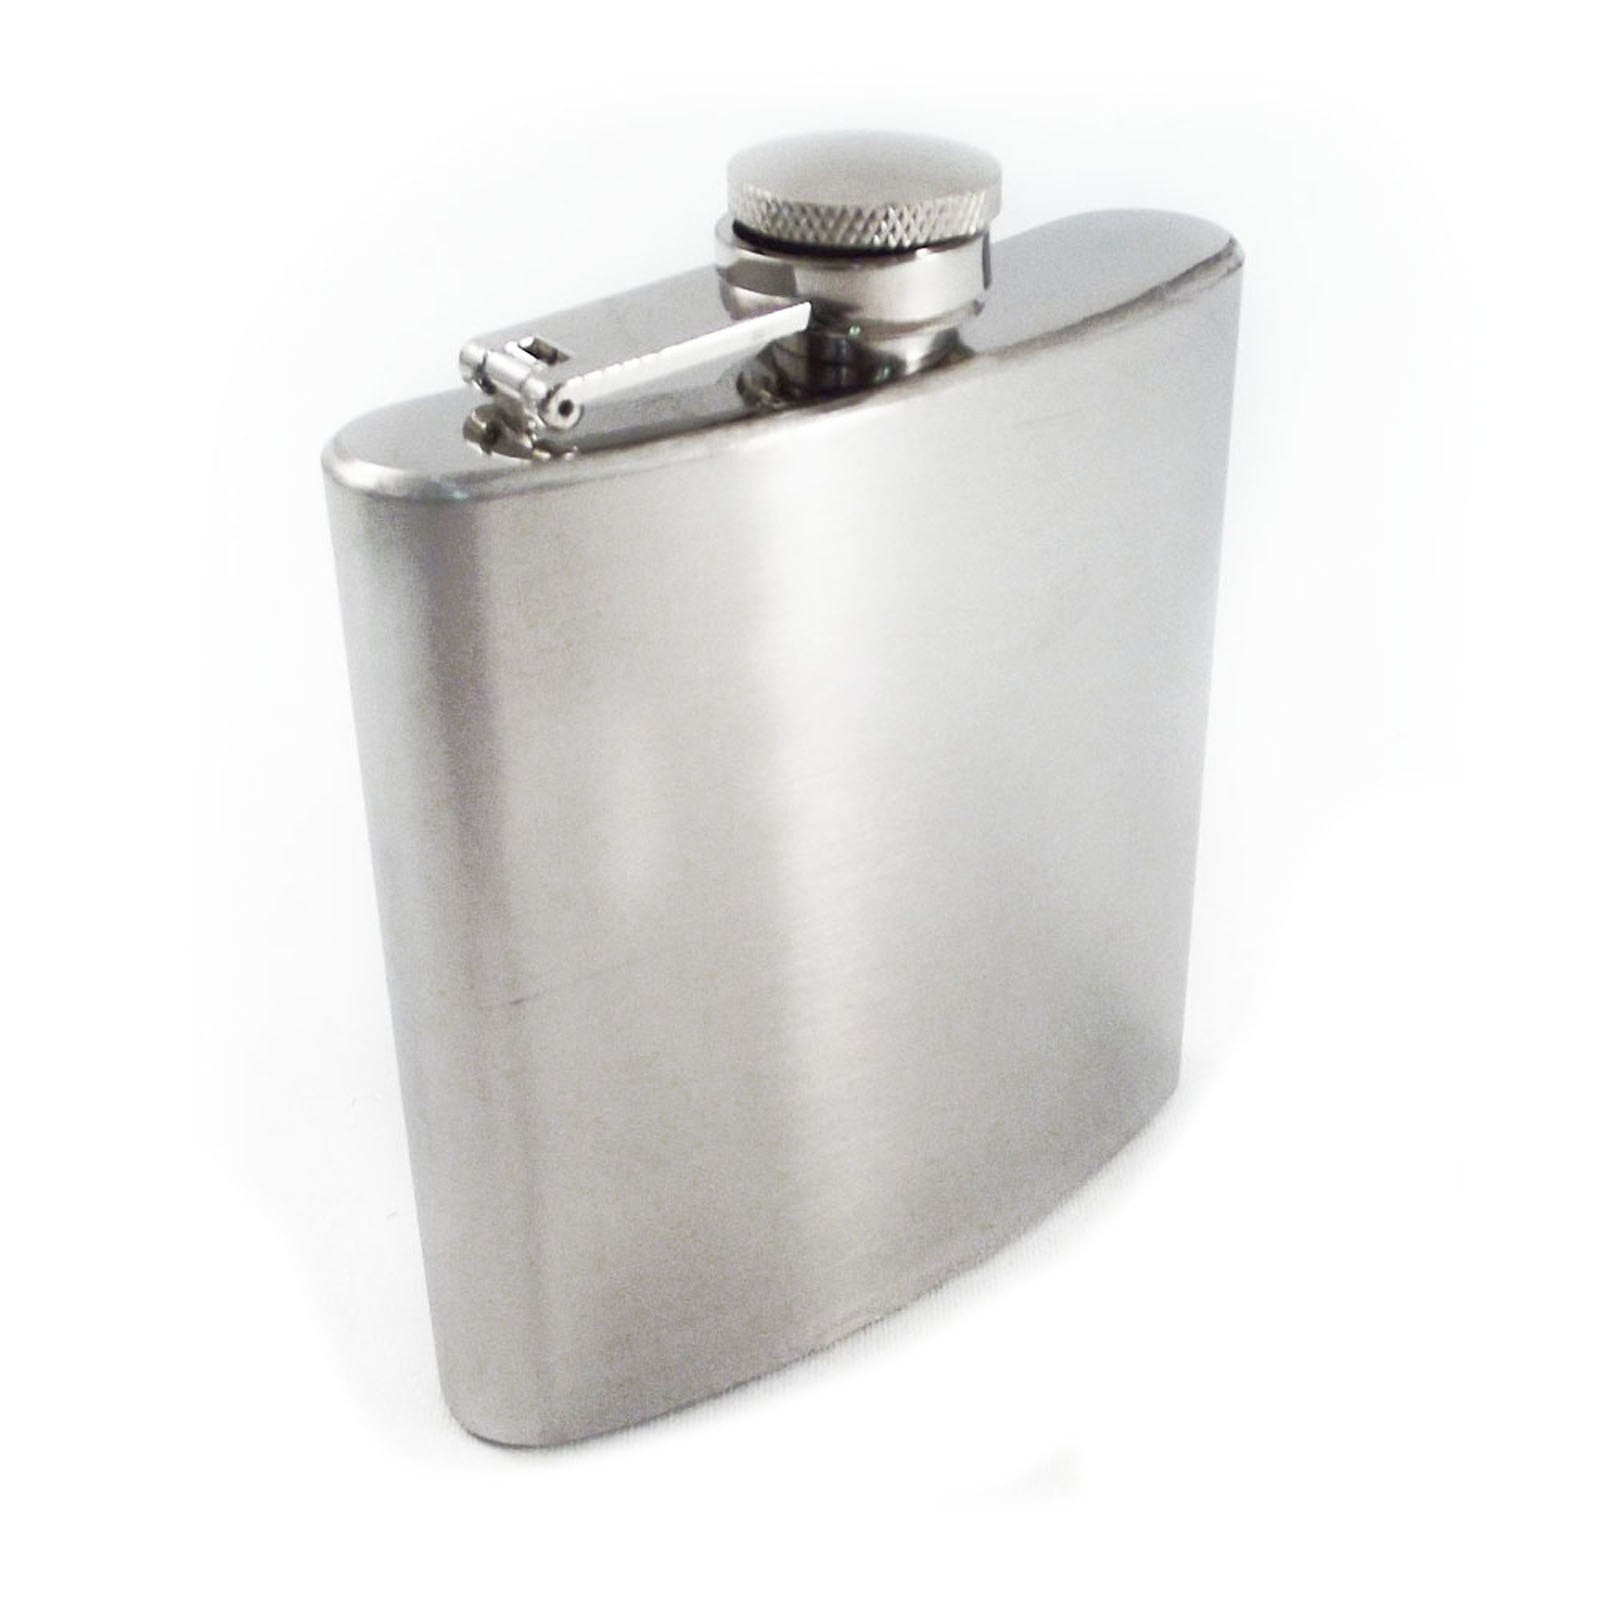 Stainless　Hip　6oz　Flask　Concealed　Drinkware　Steel　Alcohol